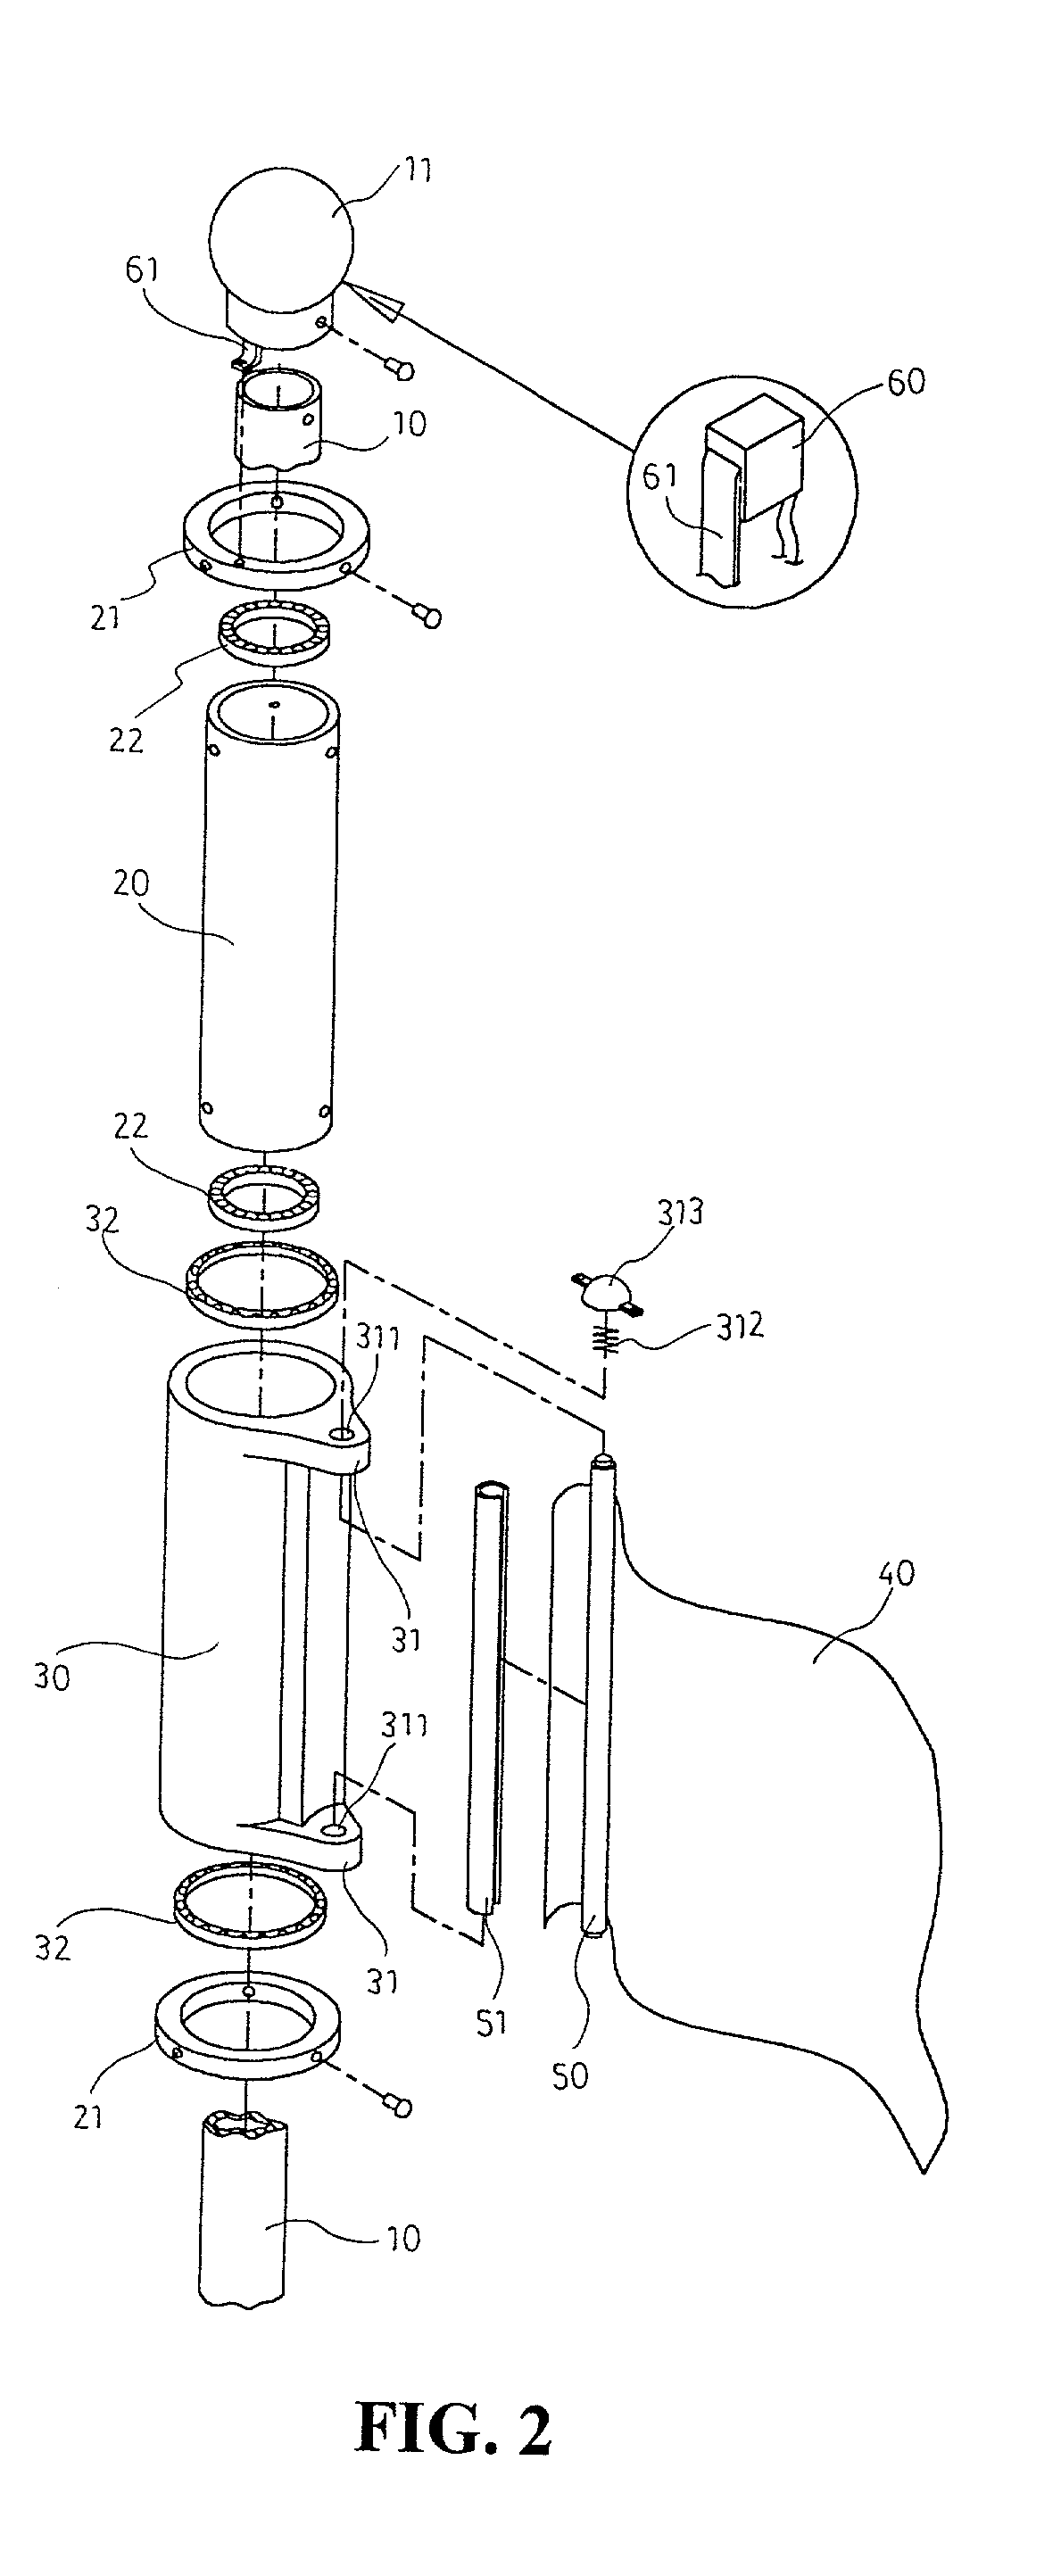 Structure of a flag elevating/descending device